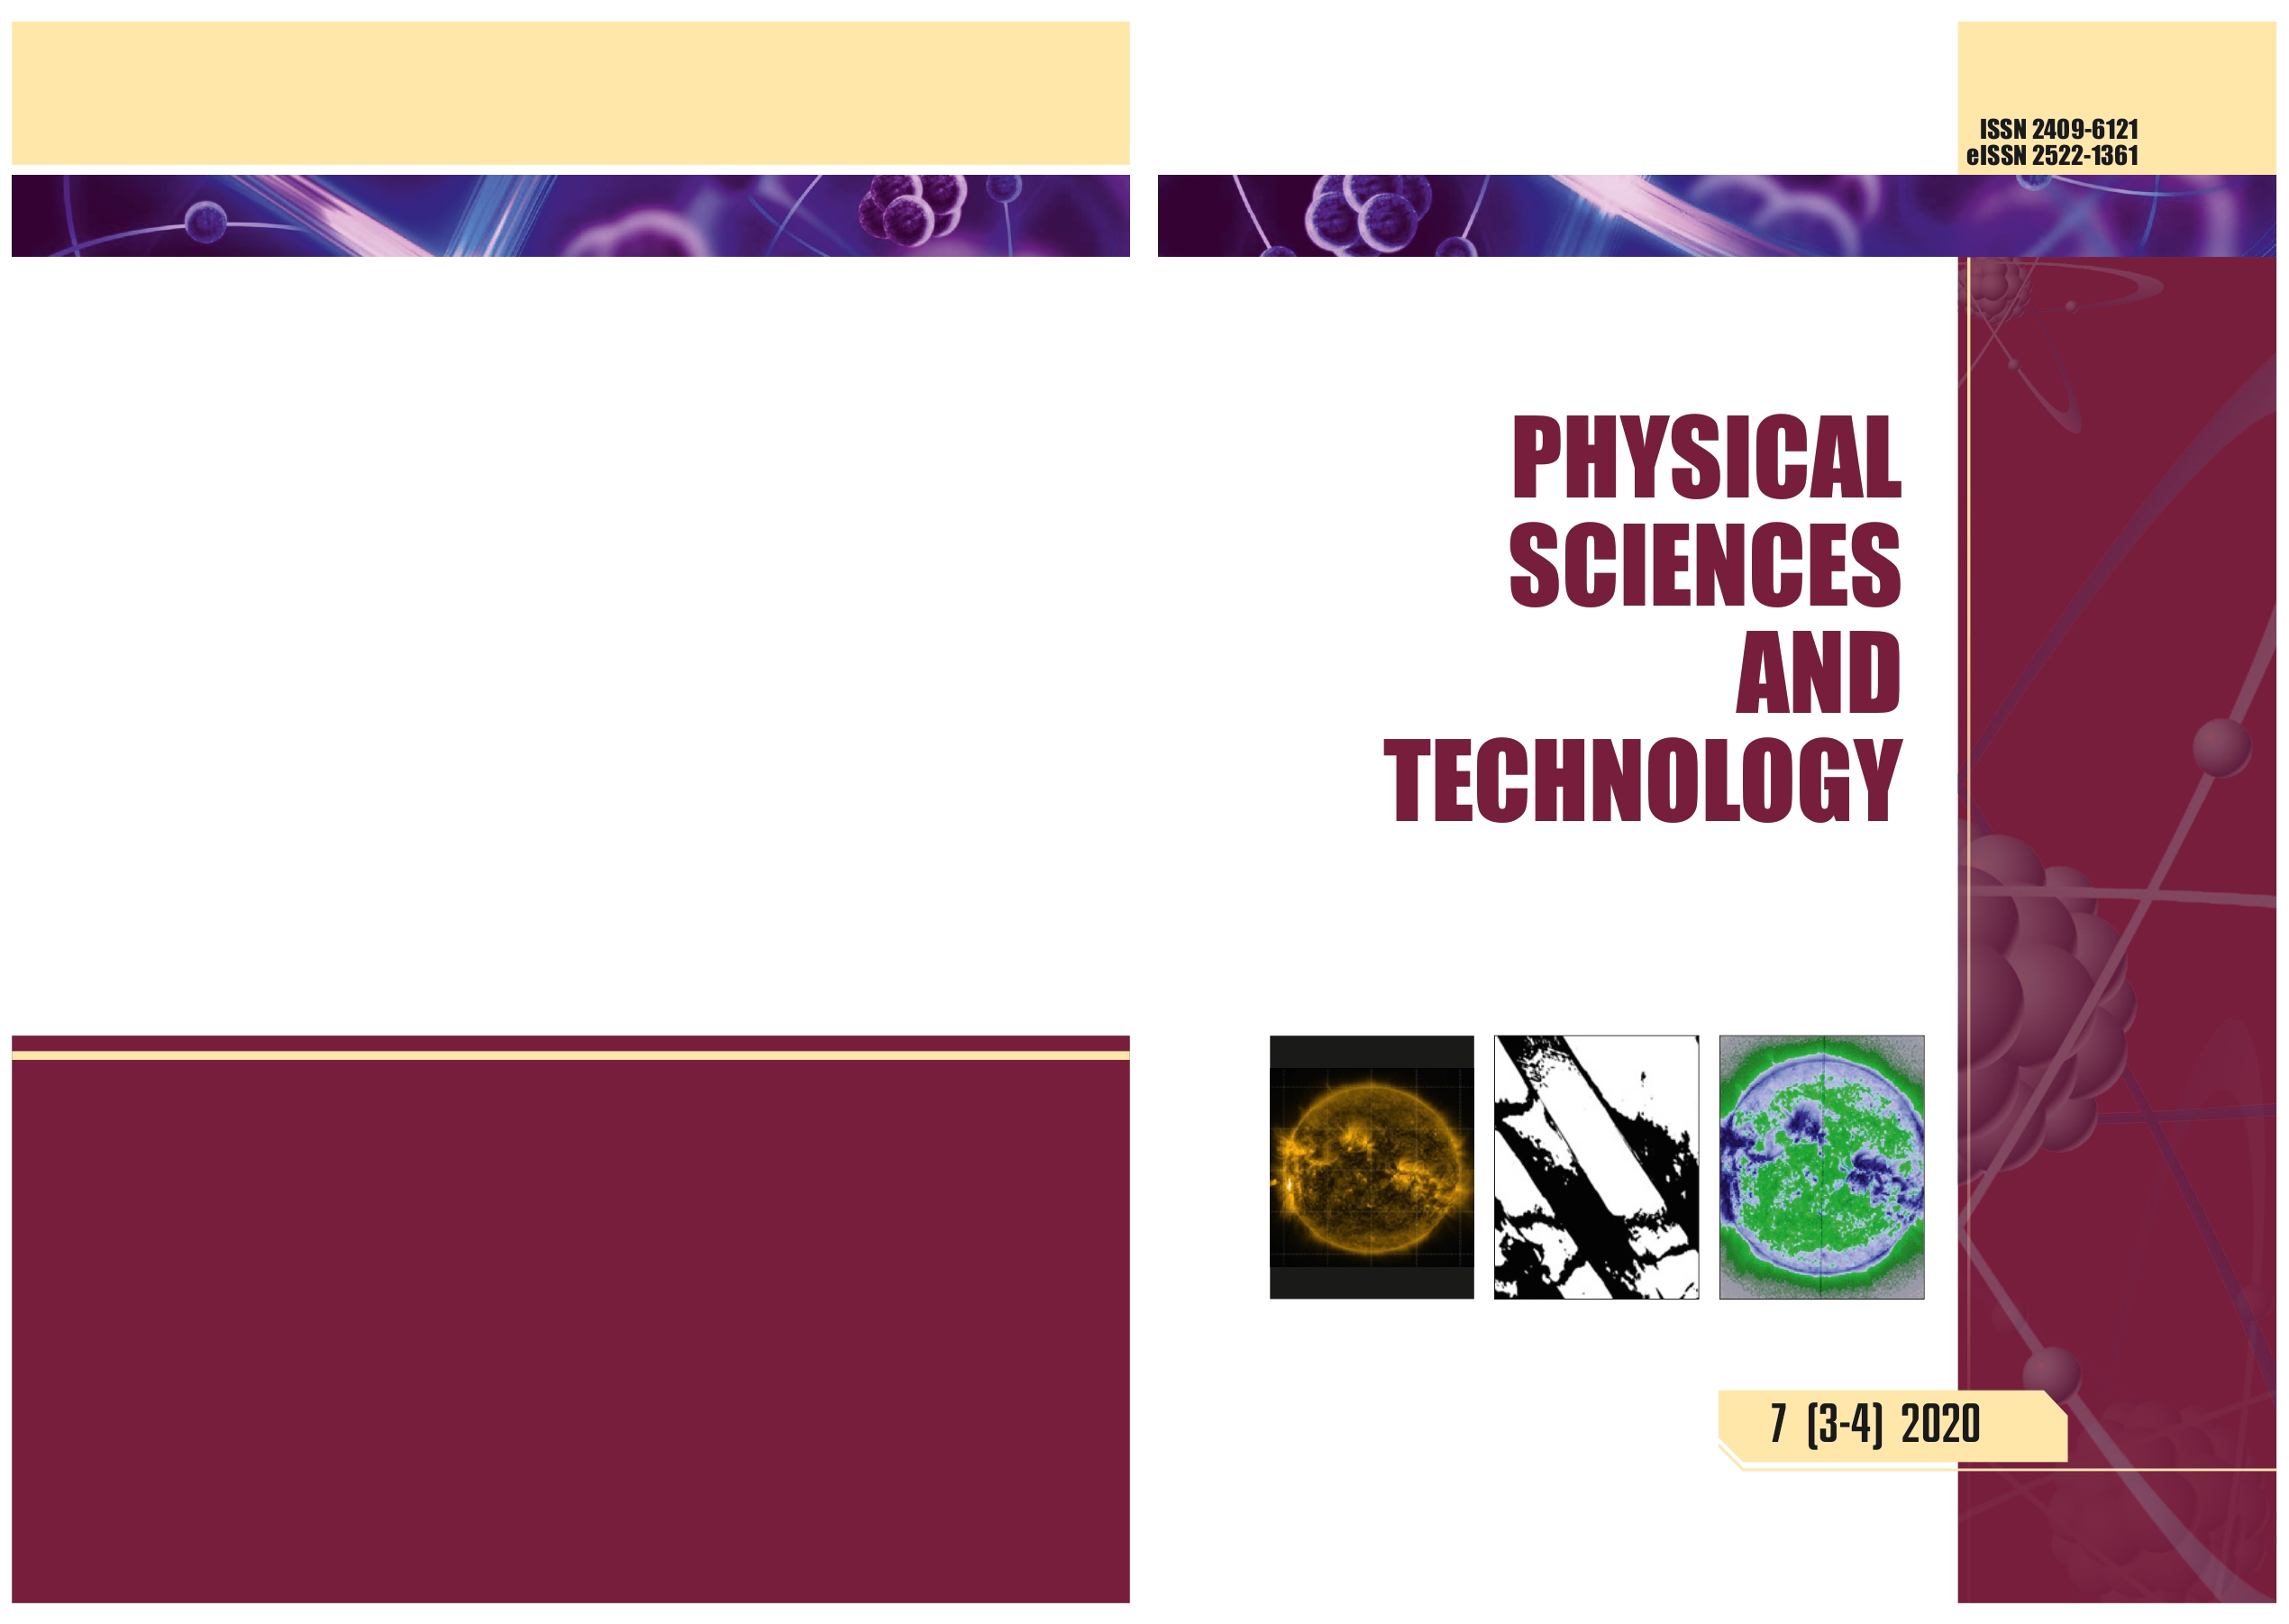 					View Vol. 7 No. 3-4 (2020): PHYSICAL SCIENCES  AND TECHNOLOGY
				